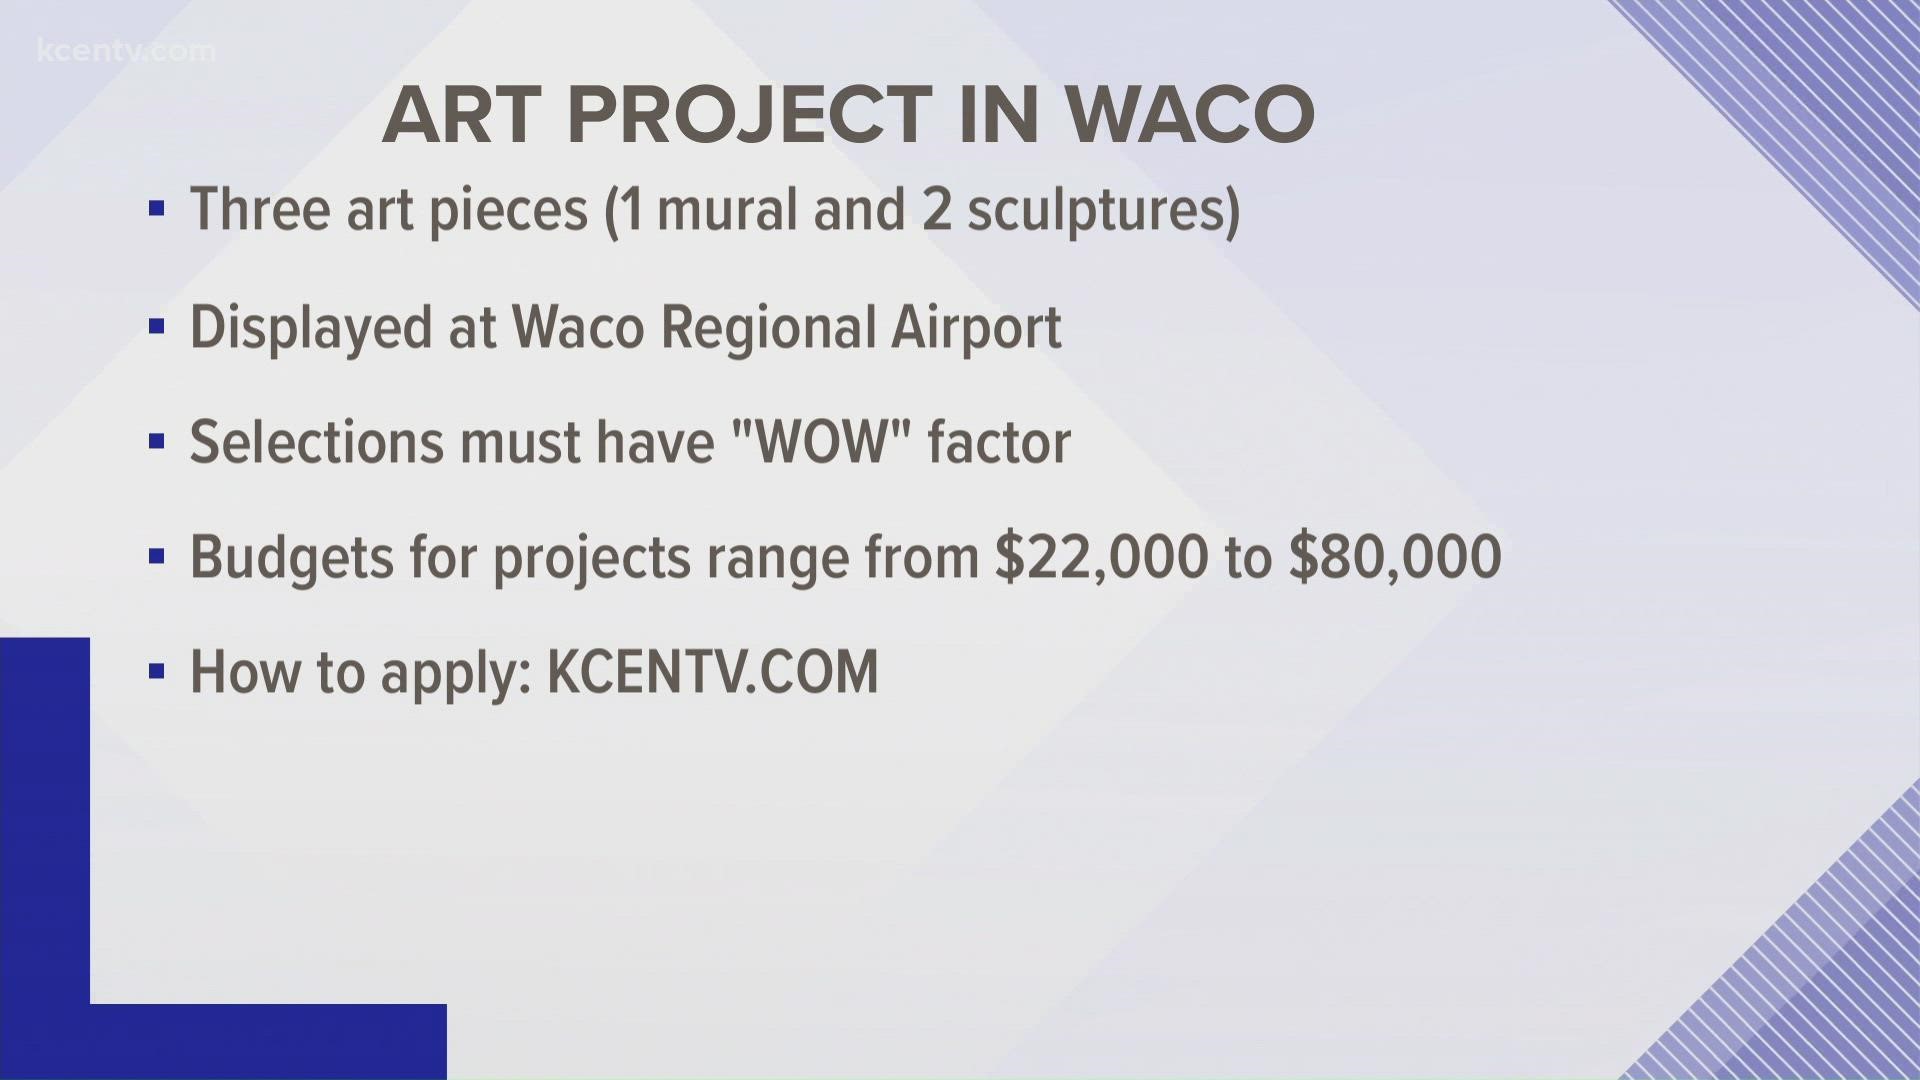 Calling all artists! The sought after artwork should range from interactive murals to sculpture(s), all representing Waco's mammoth site.